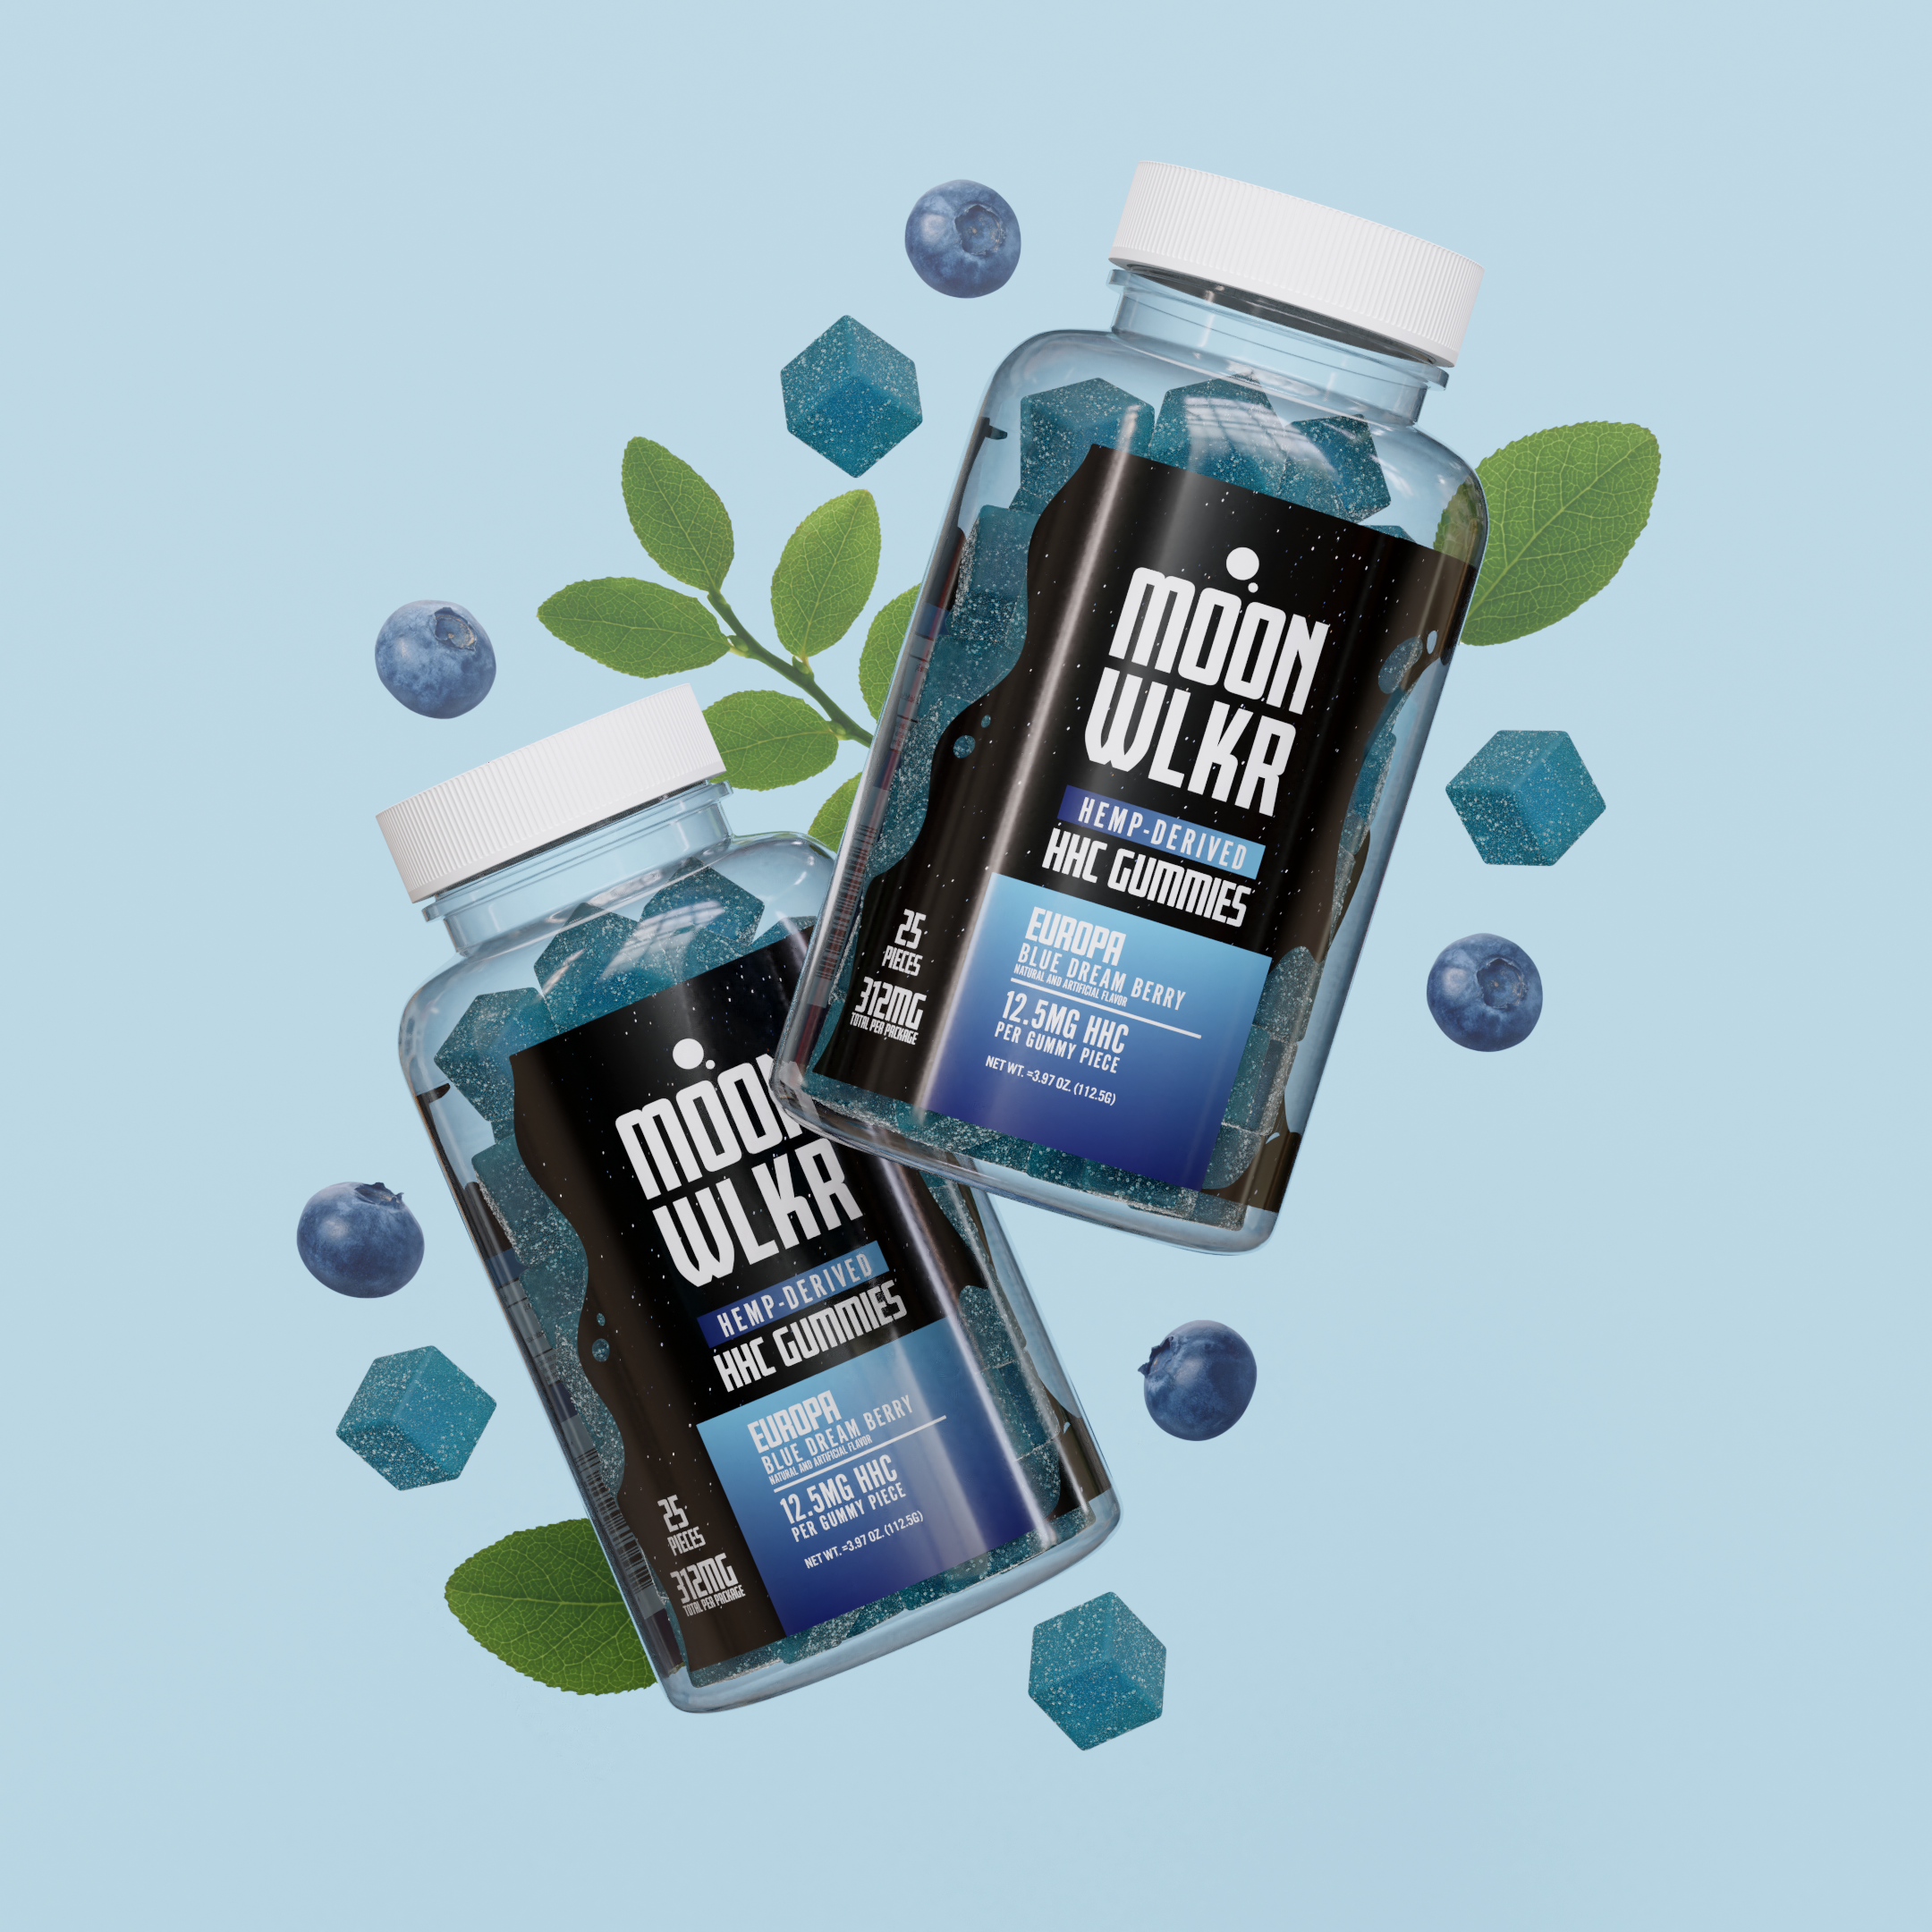 HHC gummies bottles in flavor blue dream berry surrounded by blueberries